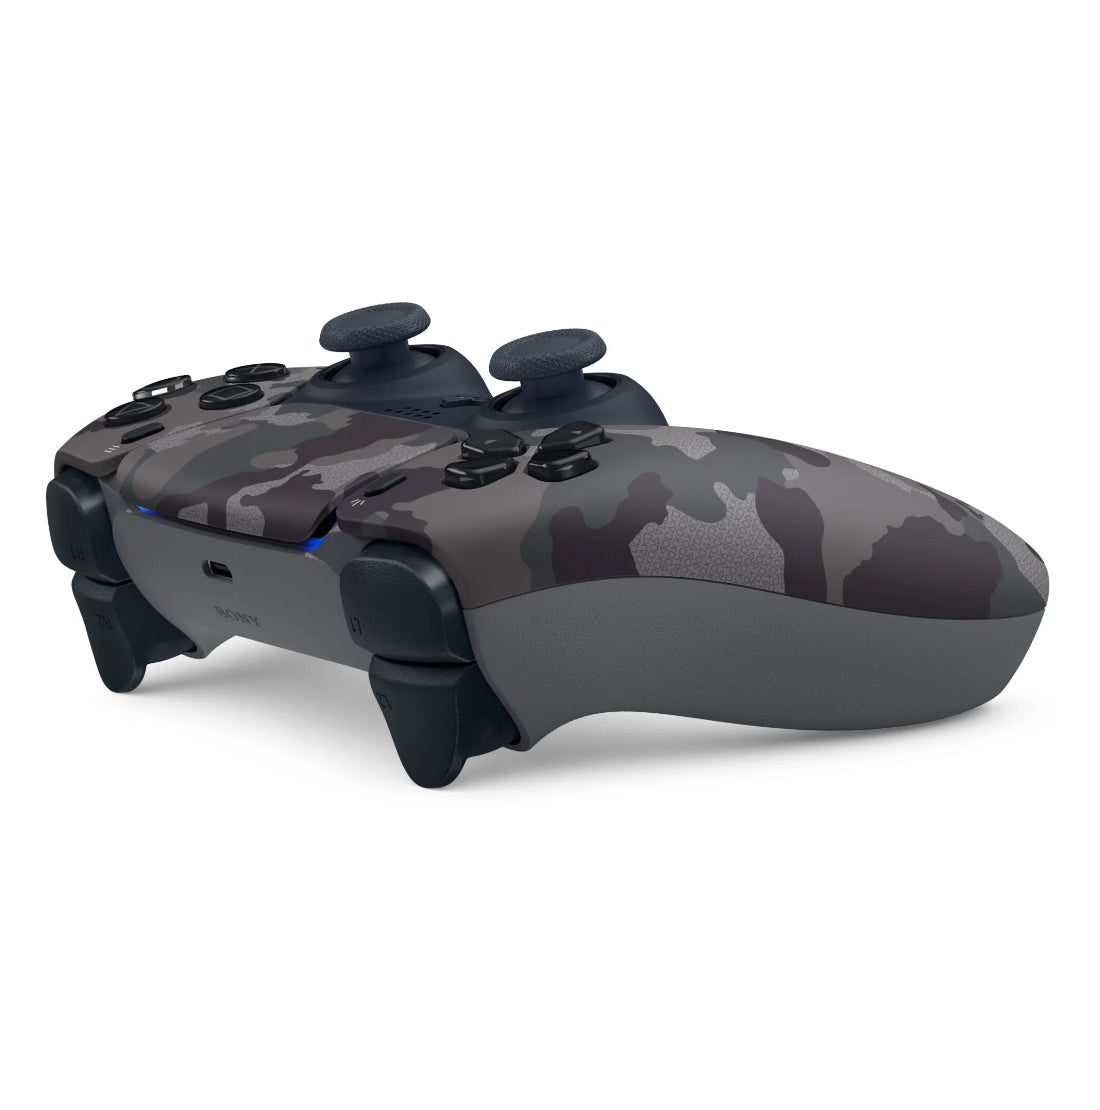 Sony Playstation 5 Digital Edition with Extra Gray Camo Controller and Dual Charging Dock Bundle - Pro-Distributing